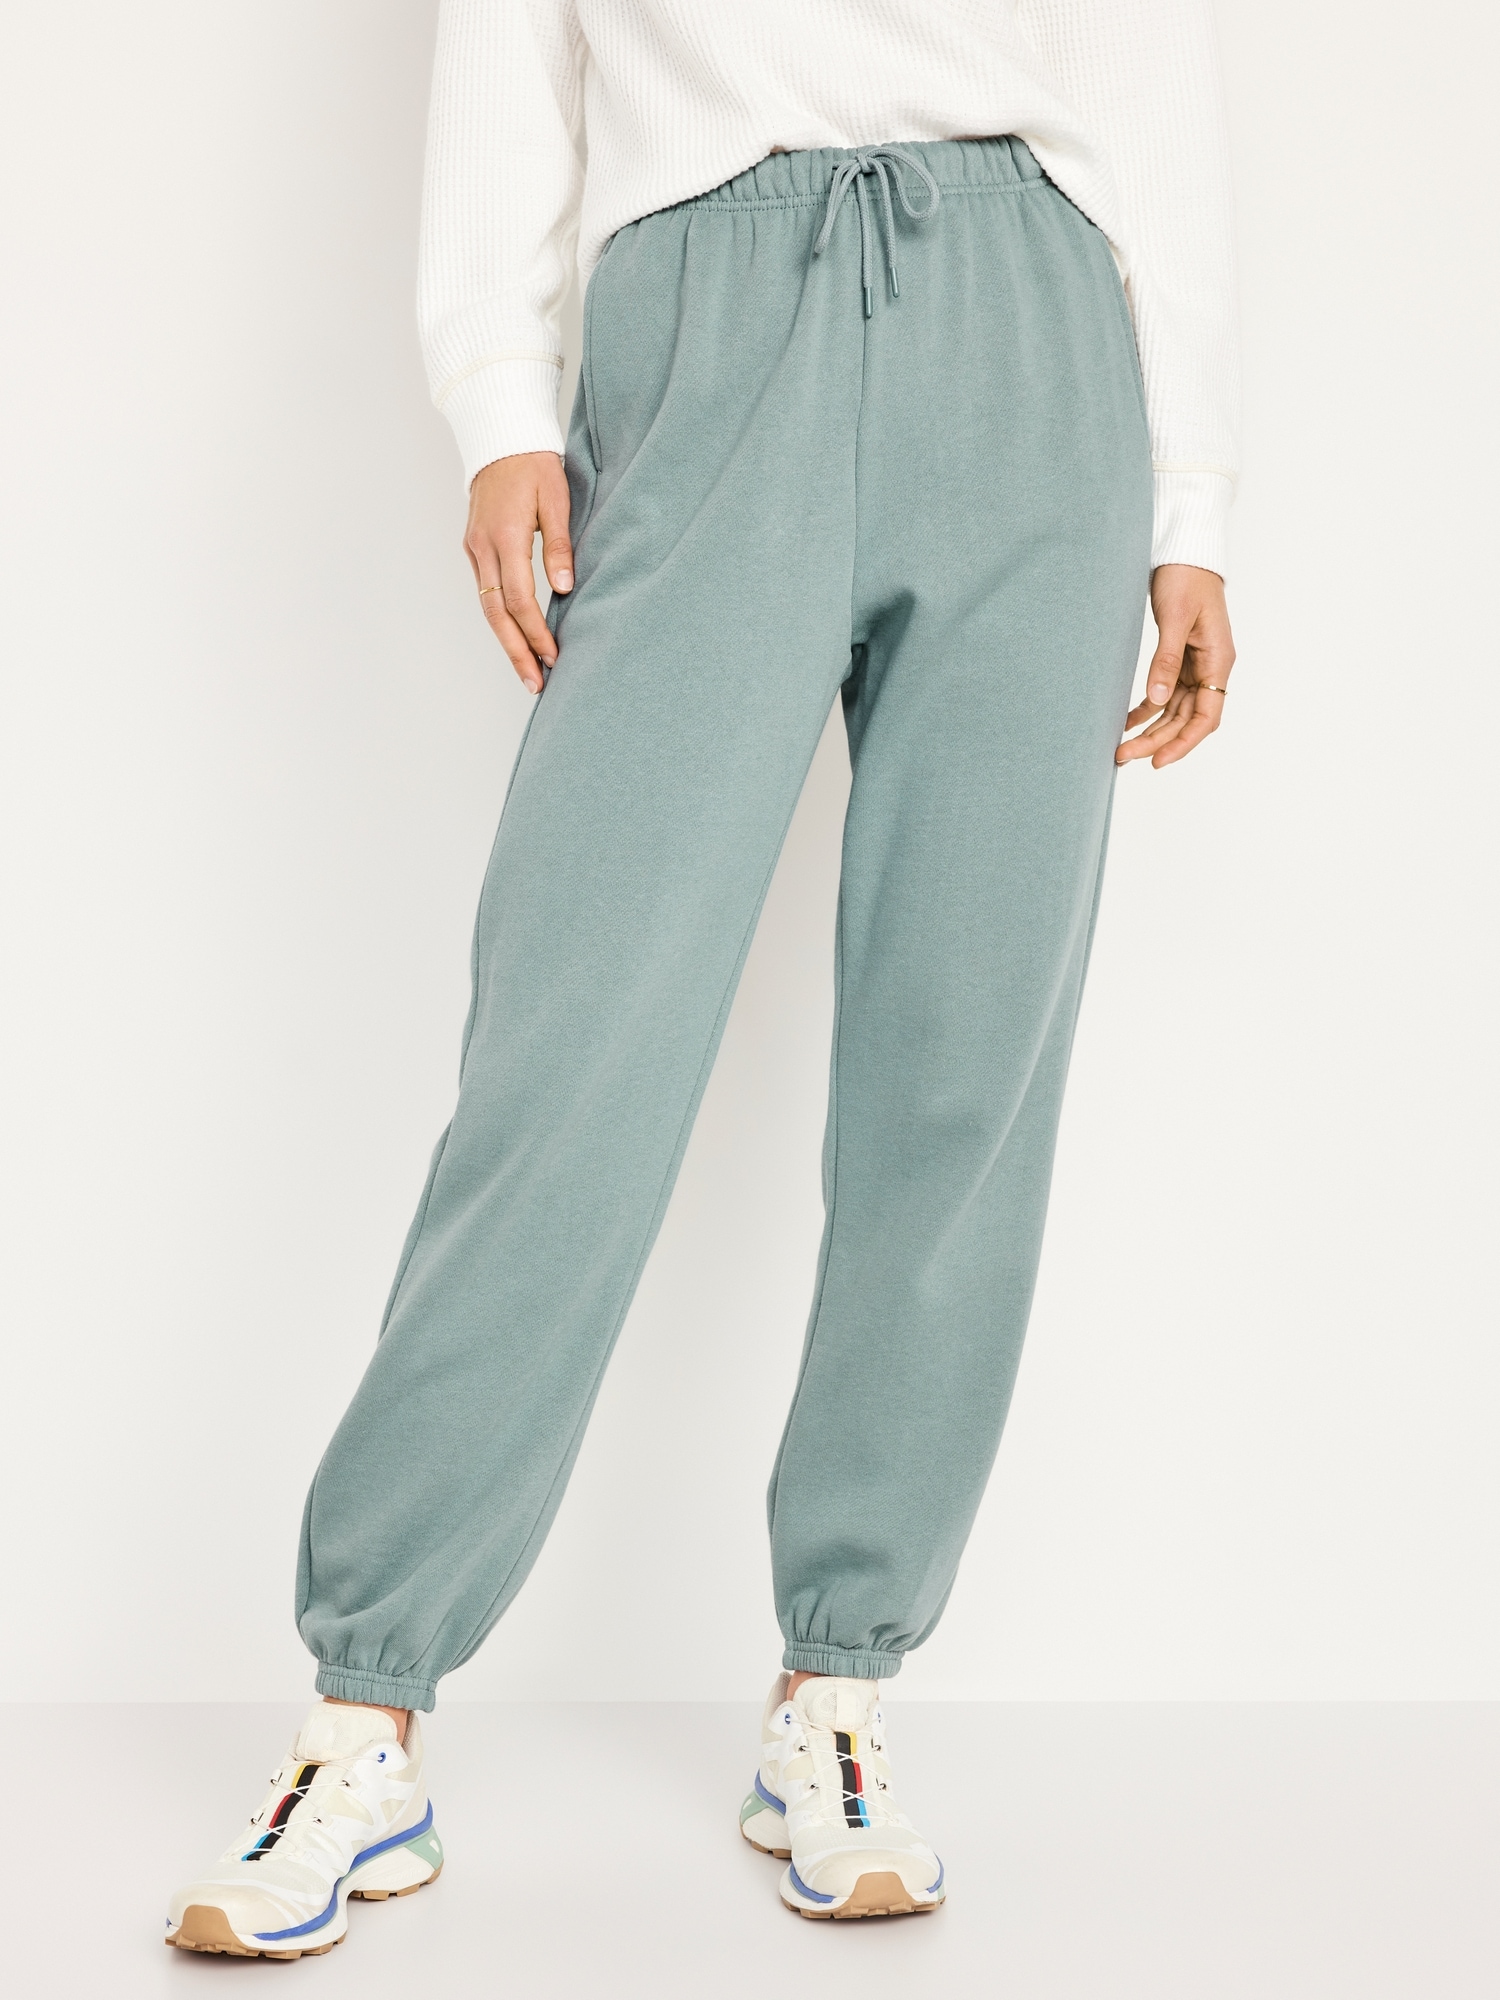 Sweatpants for Tall Women